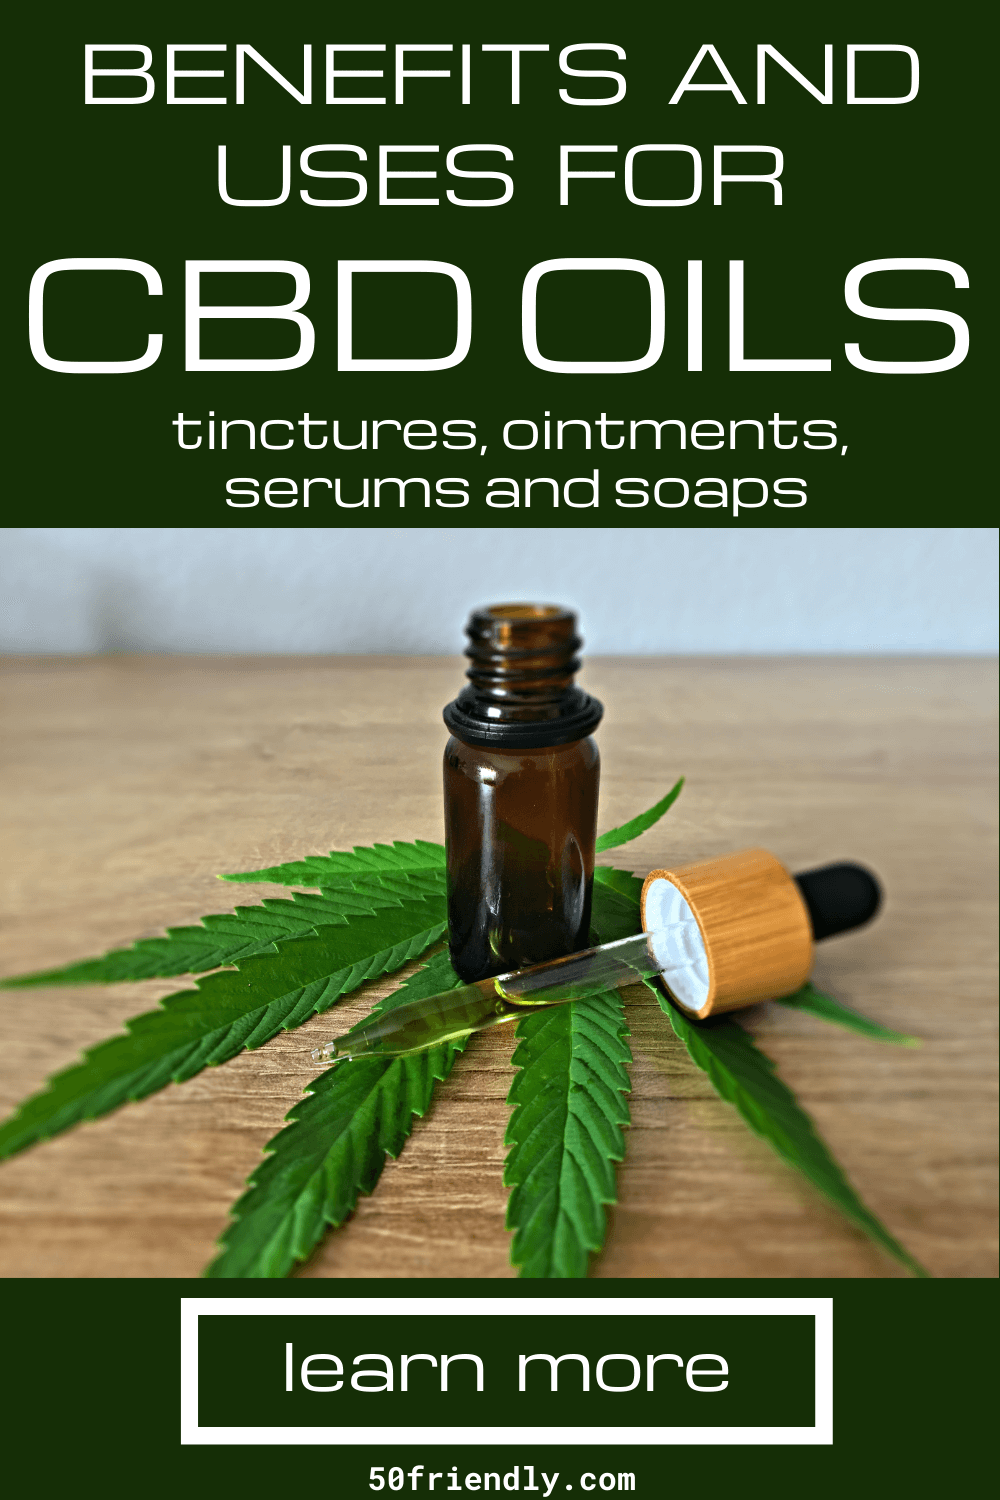 CBD Oil - What are the Benefits and Uses - 50 Friendly